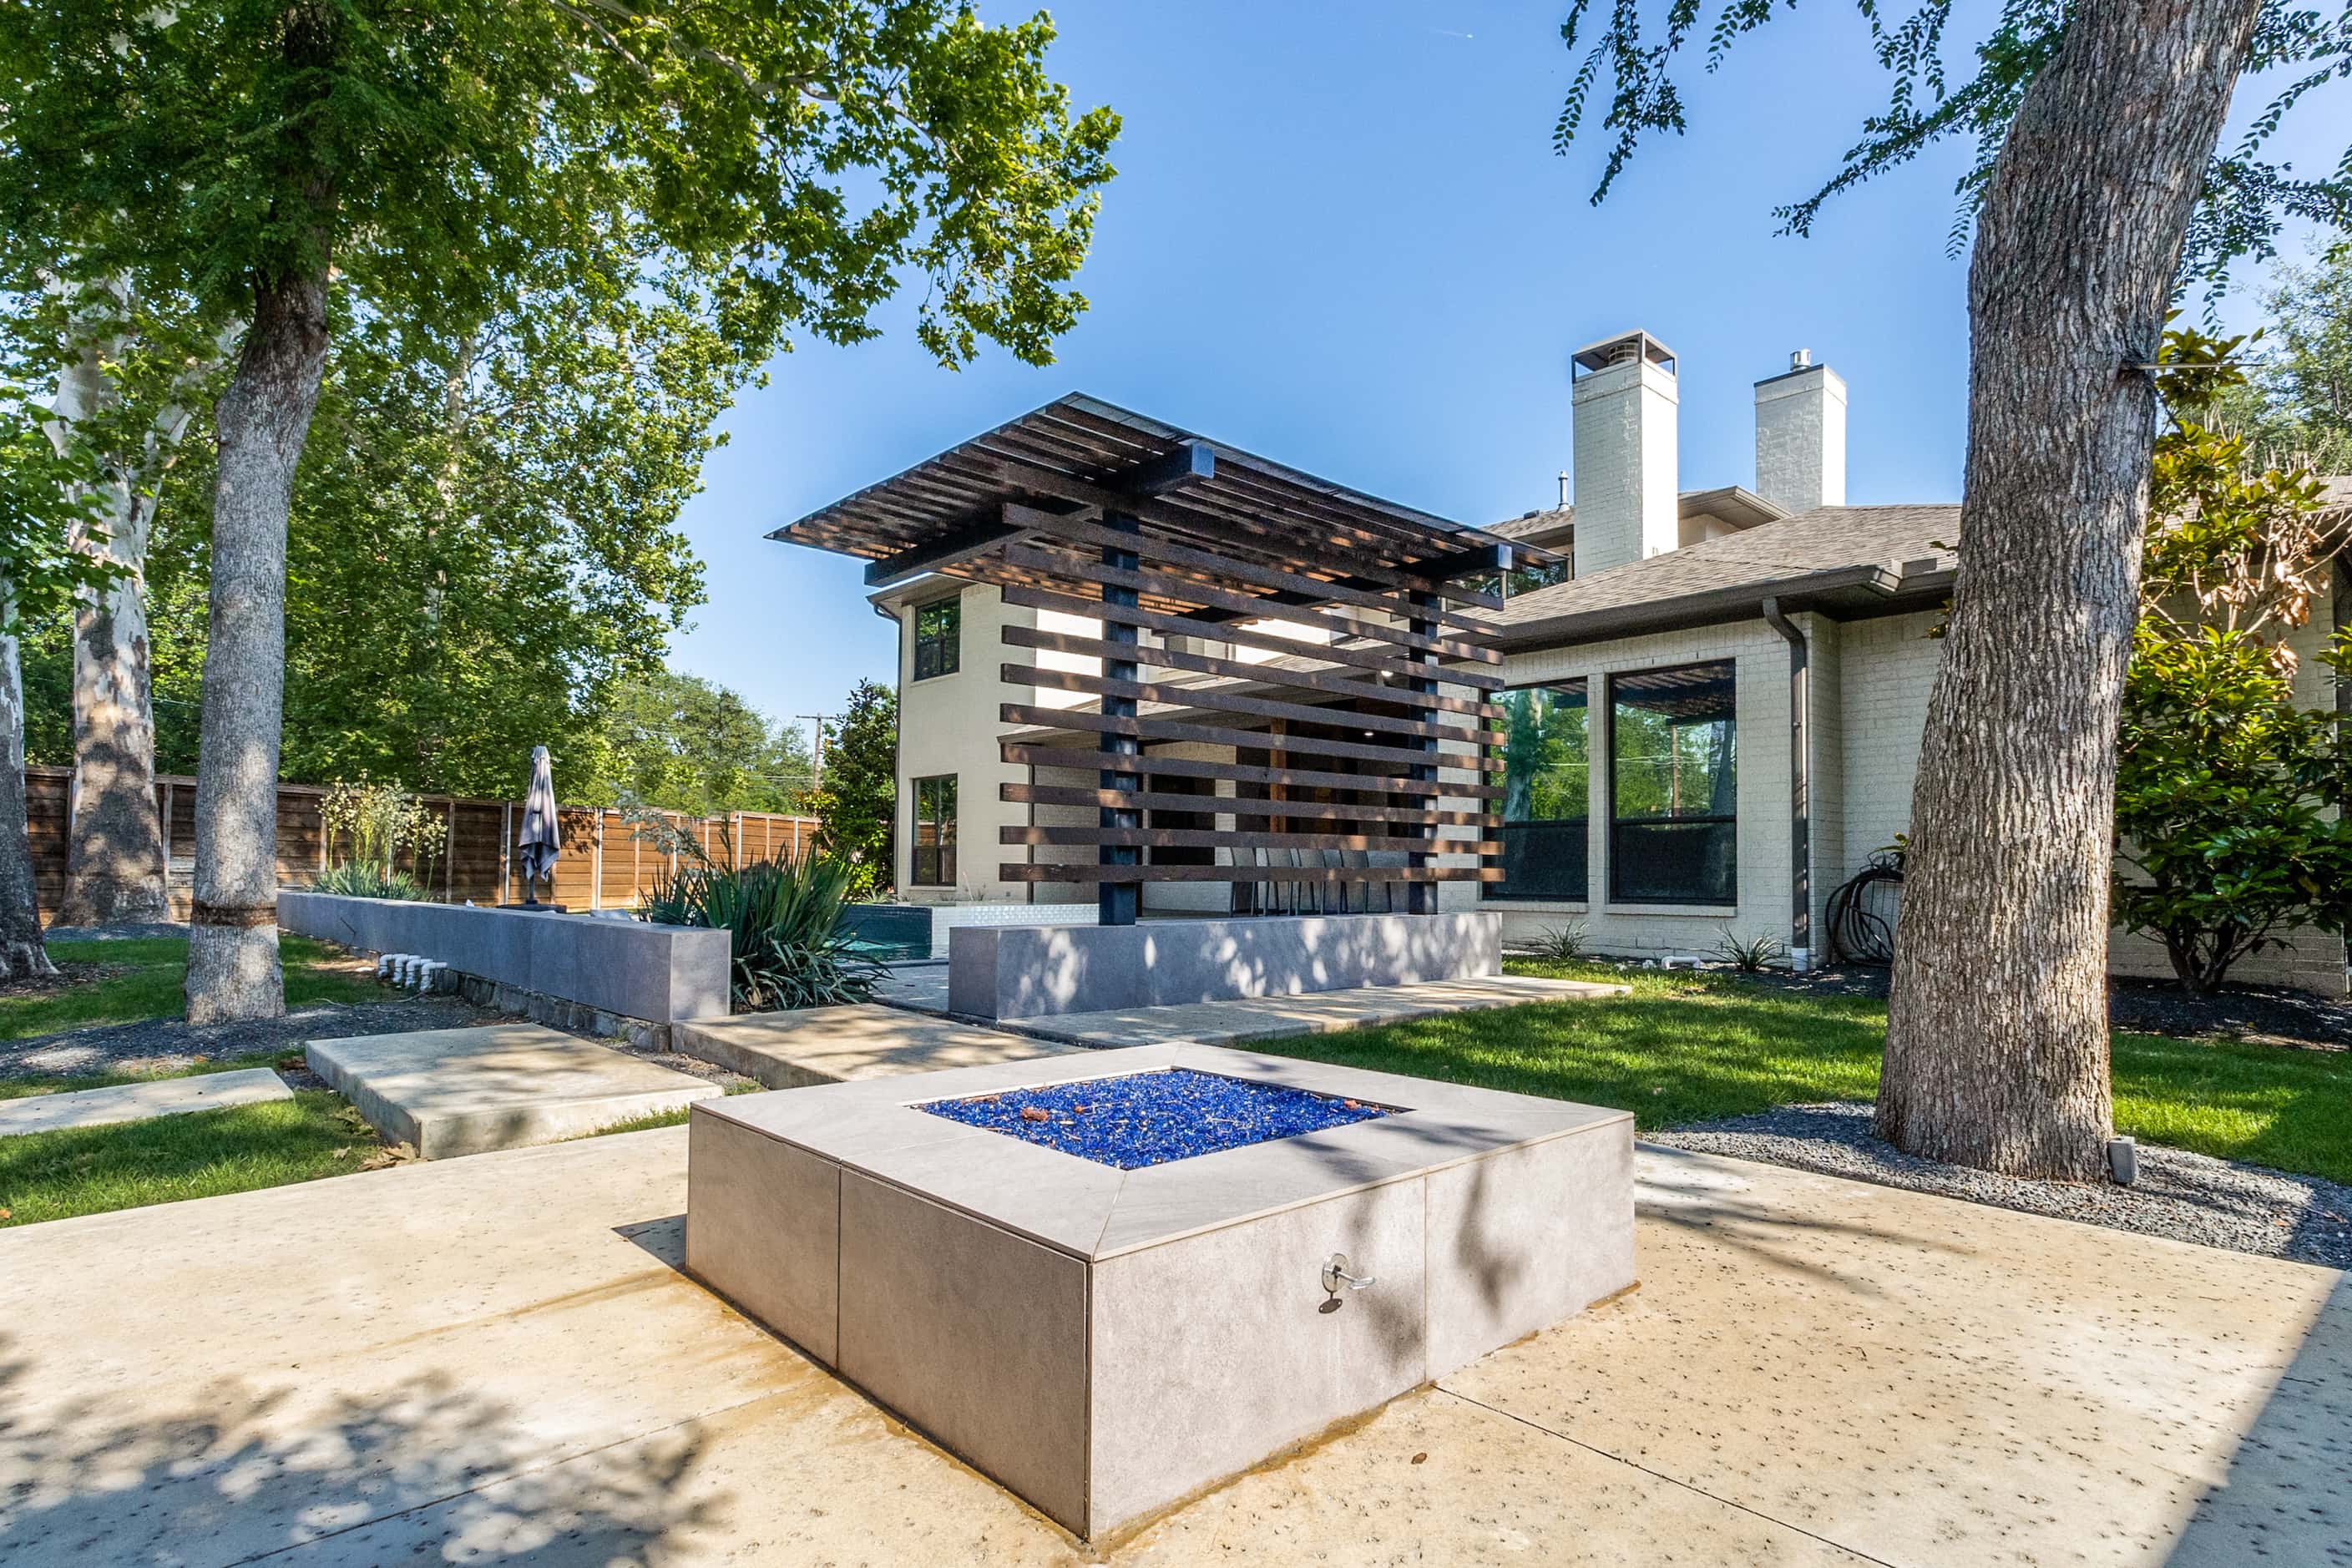 LIV golfer Bryson DeChambeau is selling his $3 million Melshire Estates property. The 5-bed,...